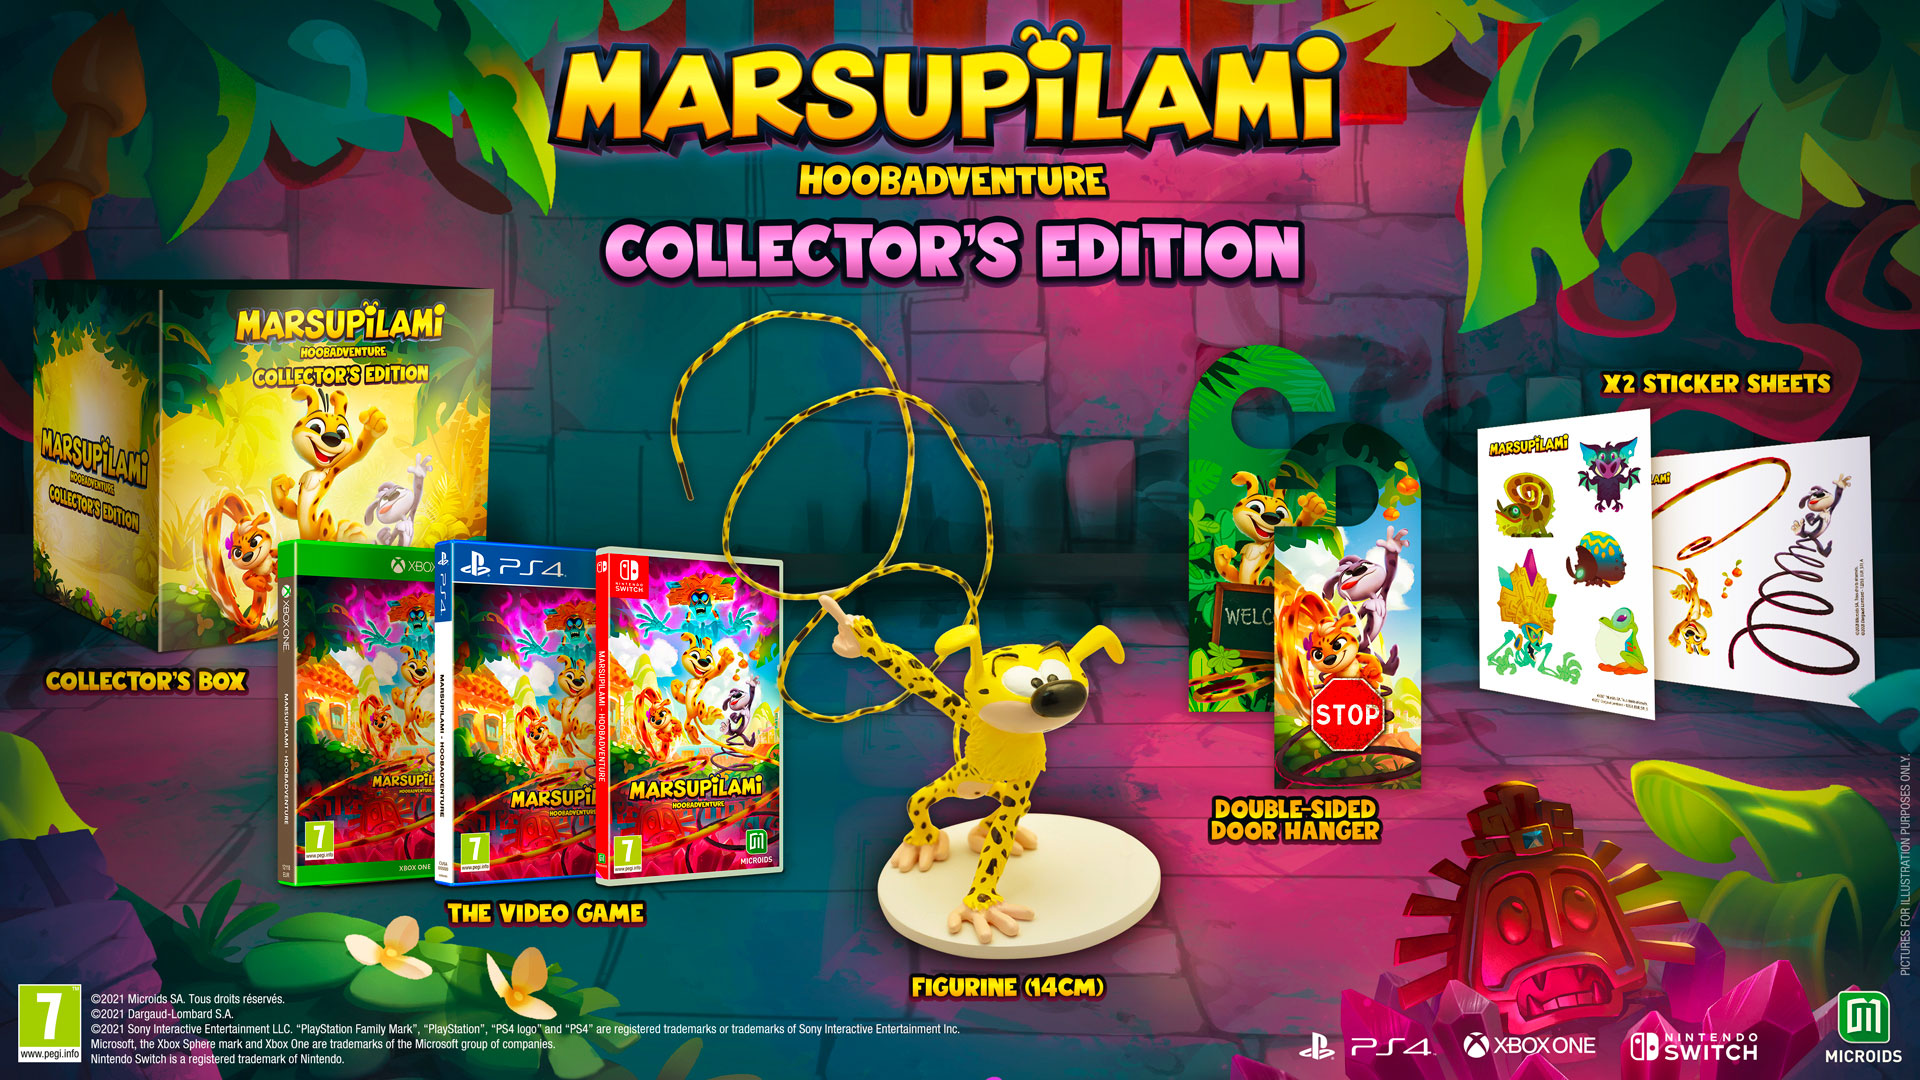 Marsupilami: Hoobadventure - Collector's Edition (Switch), Microids